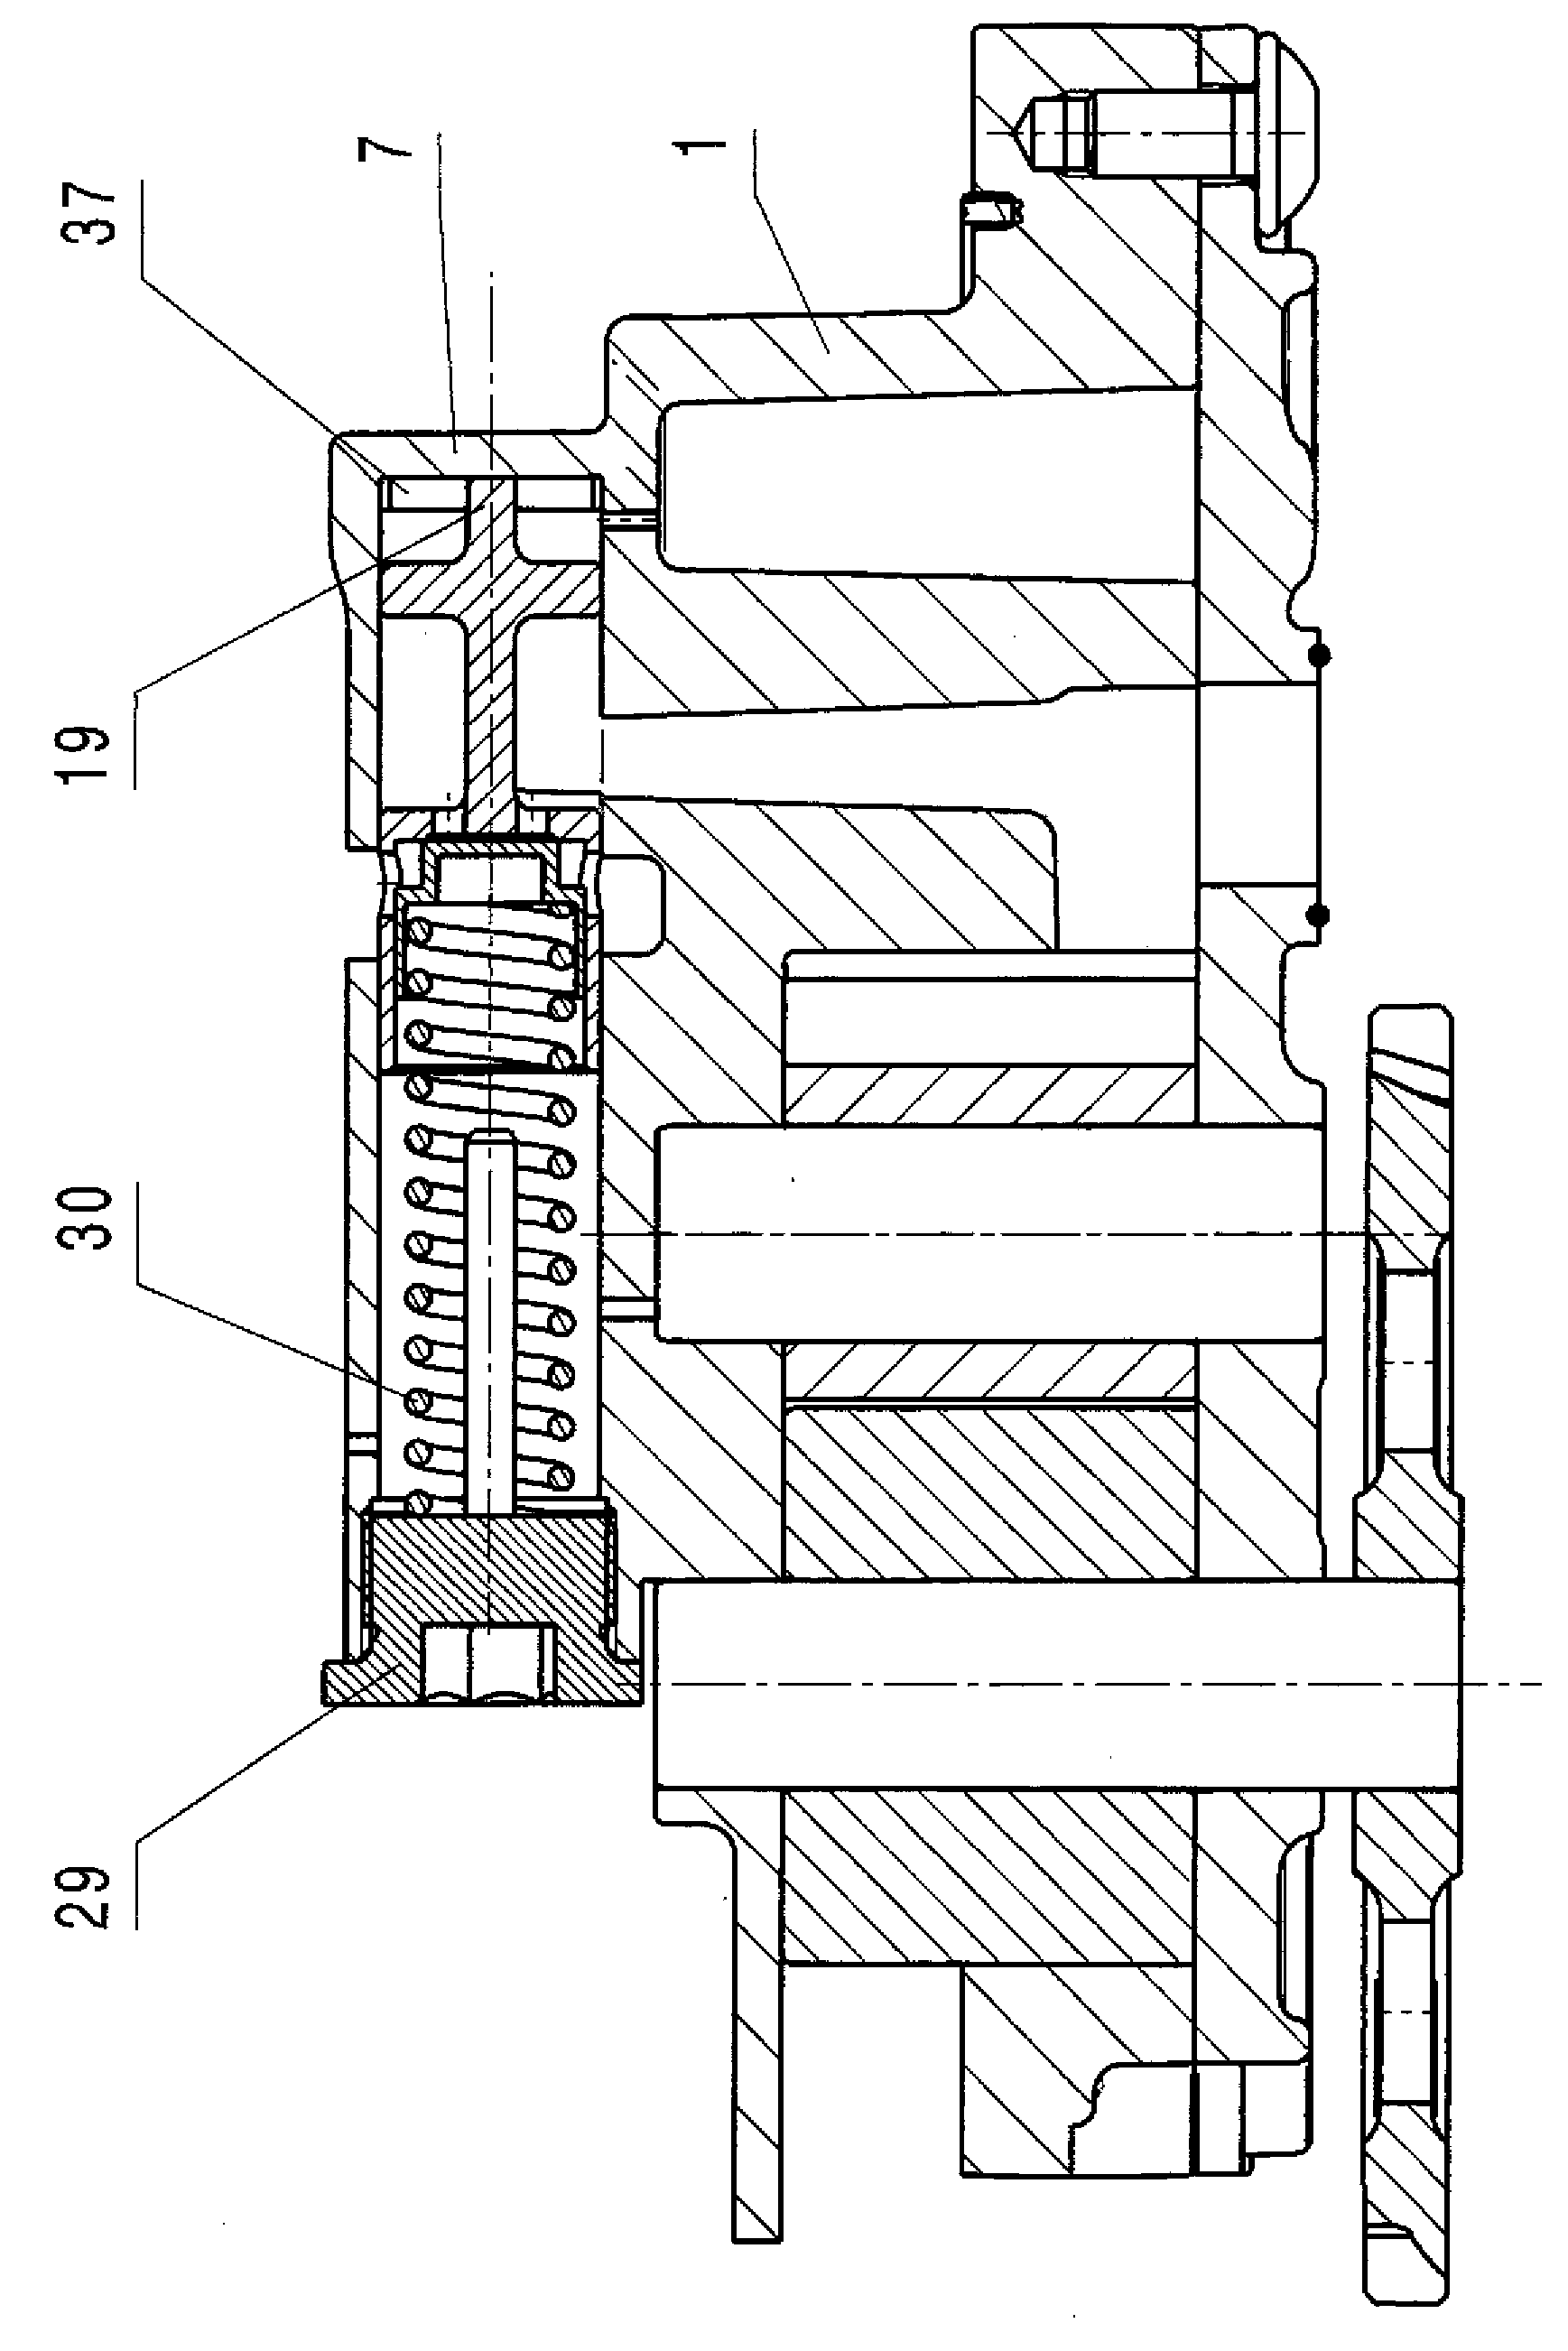 Lubricant valve for oil pumps of internal combustion engines